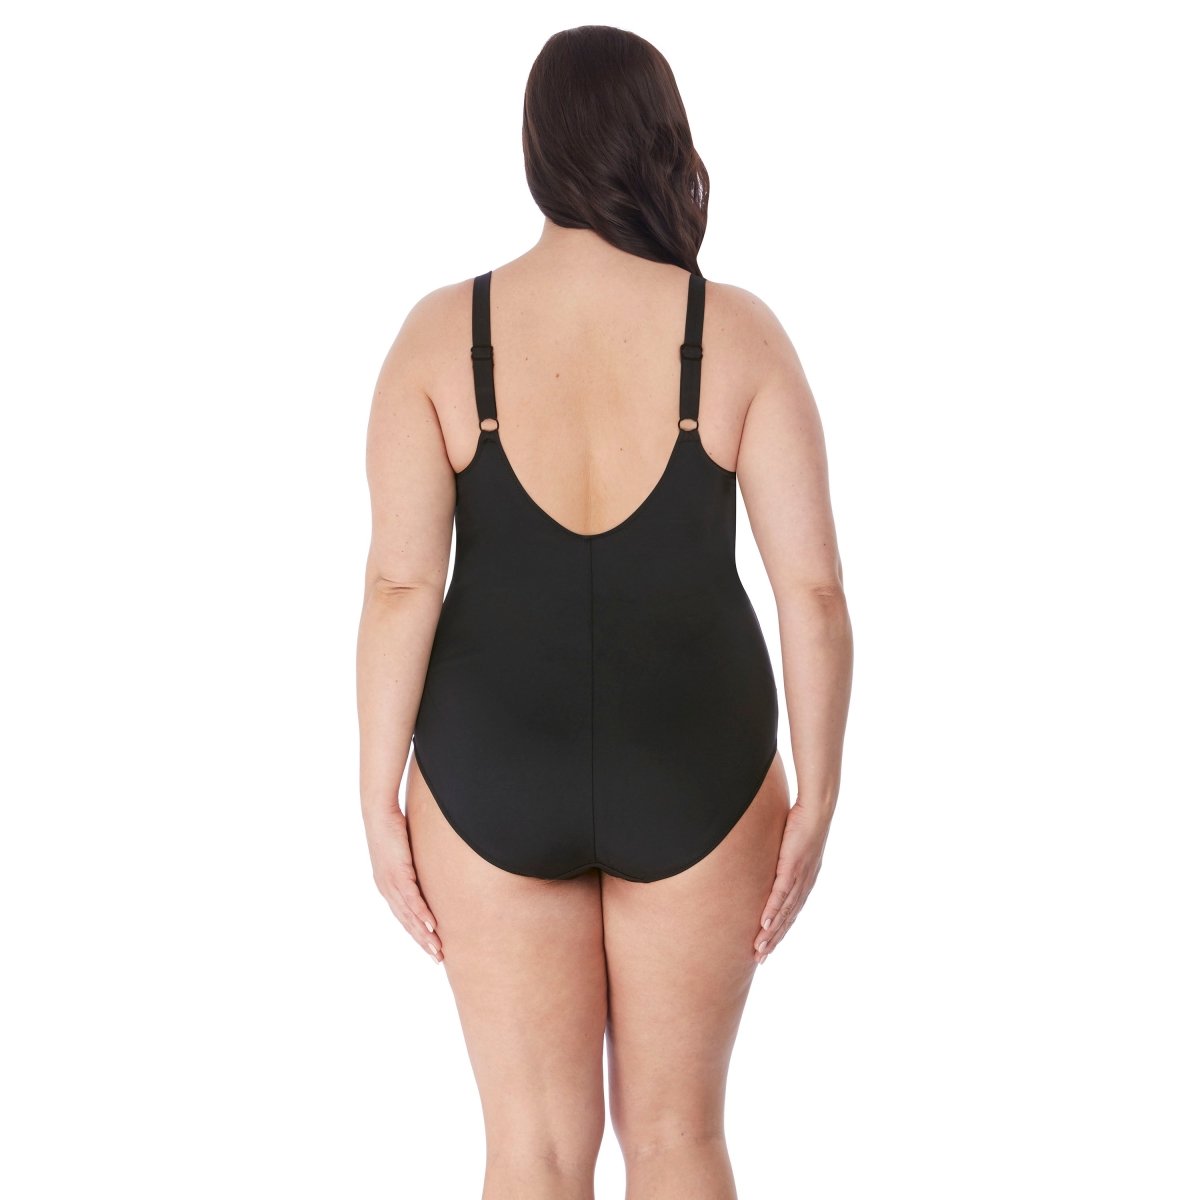 Swim by Elomi - Electroflower Moulded Swimsuit – Black Country Bra